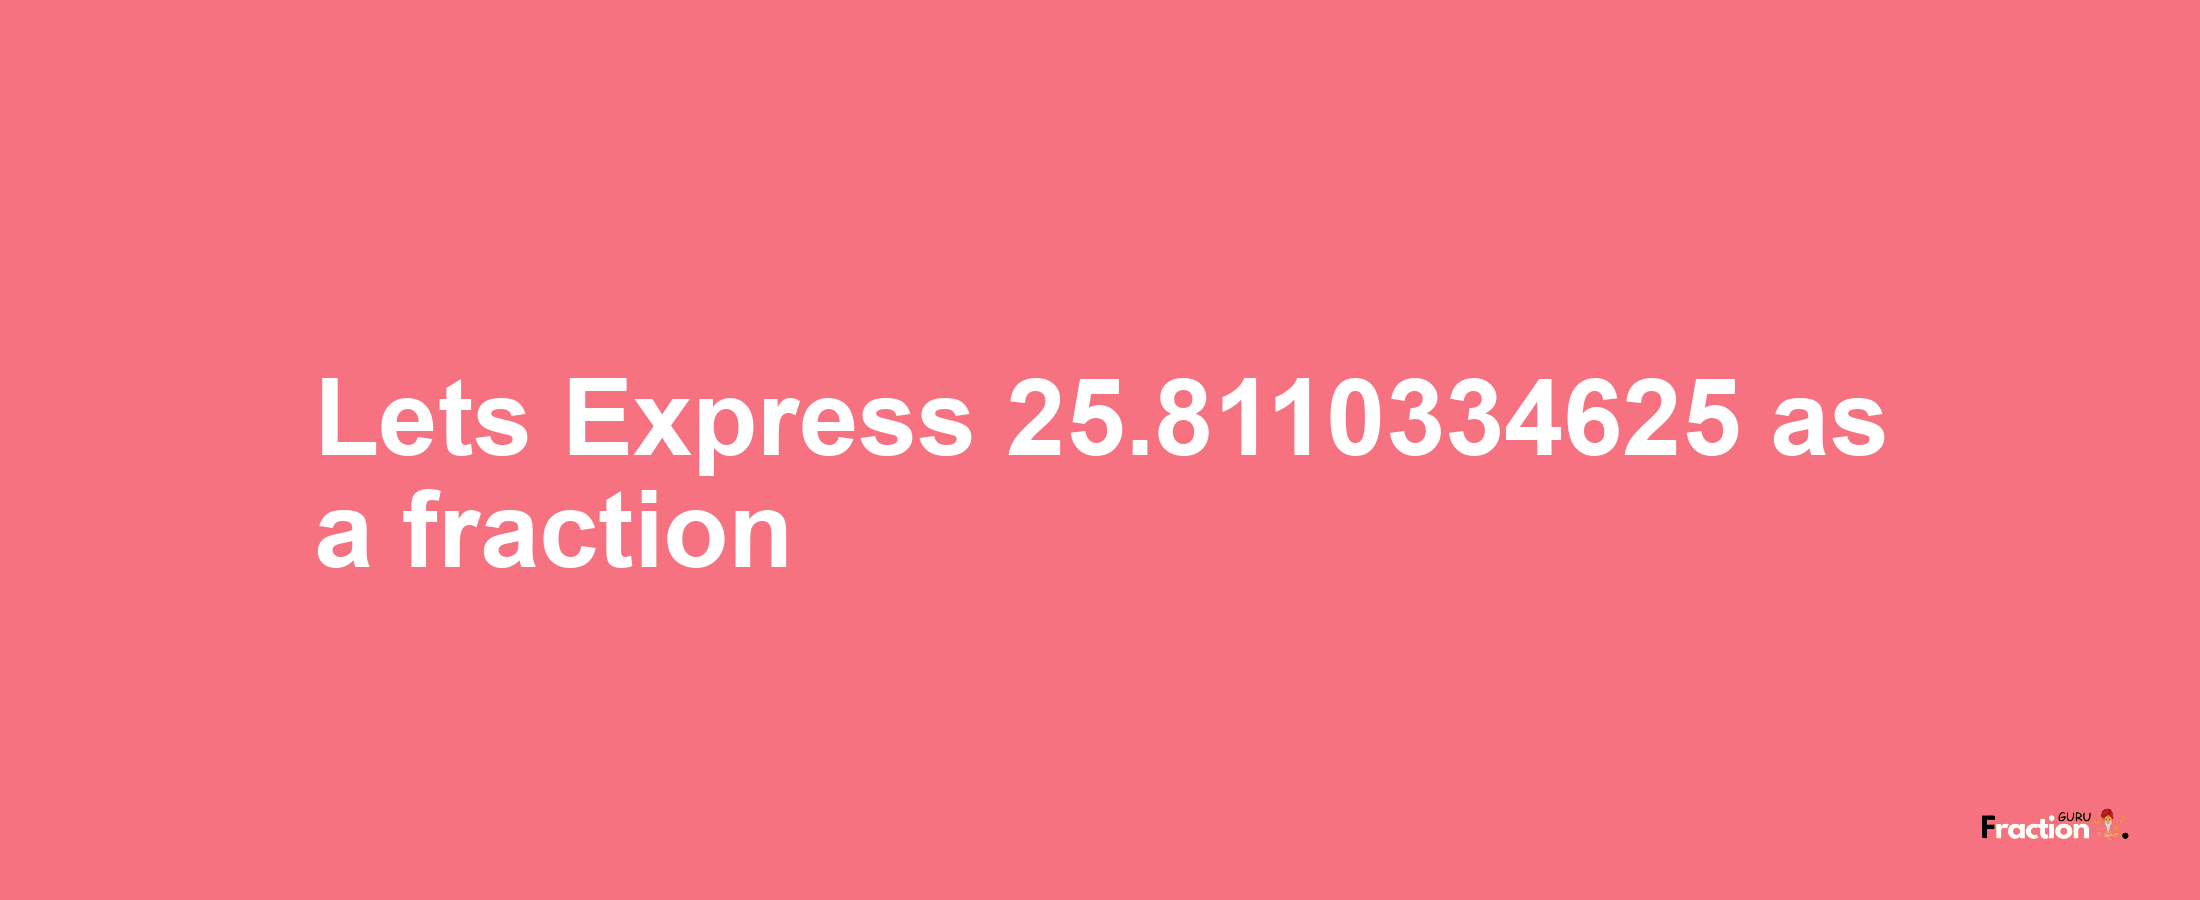 Lets Express 25.8110334625 as afraction